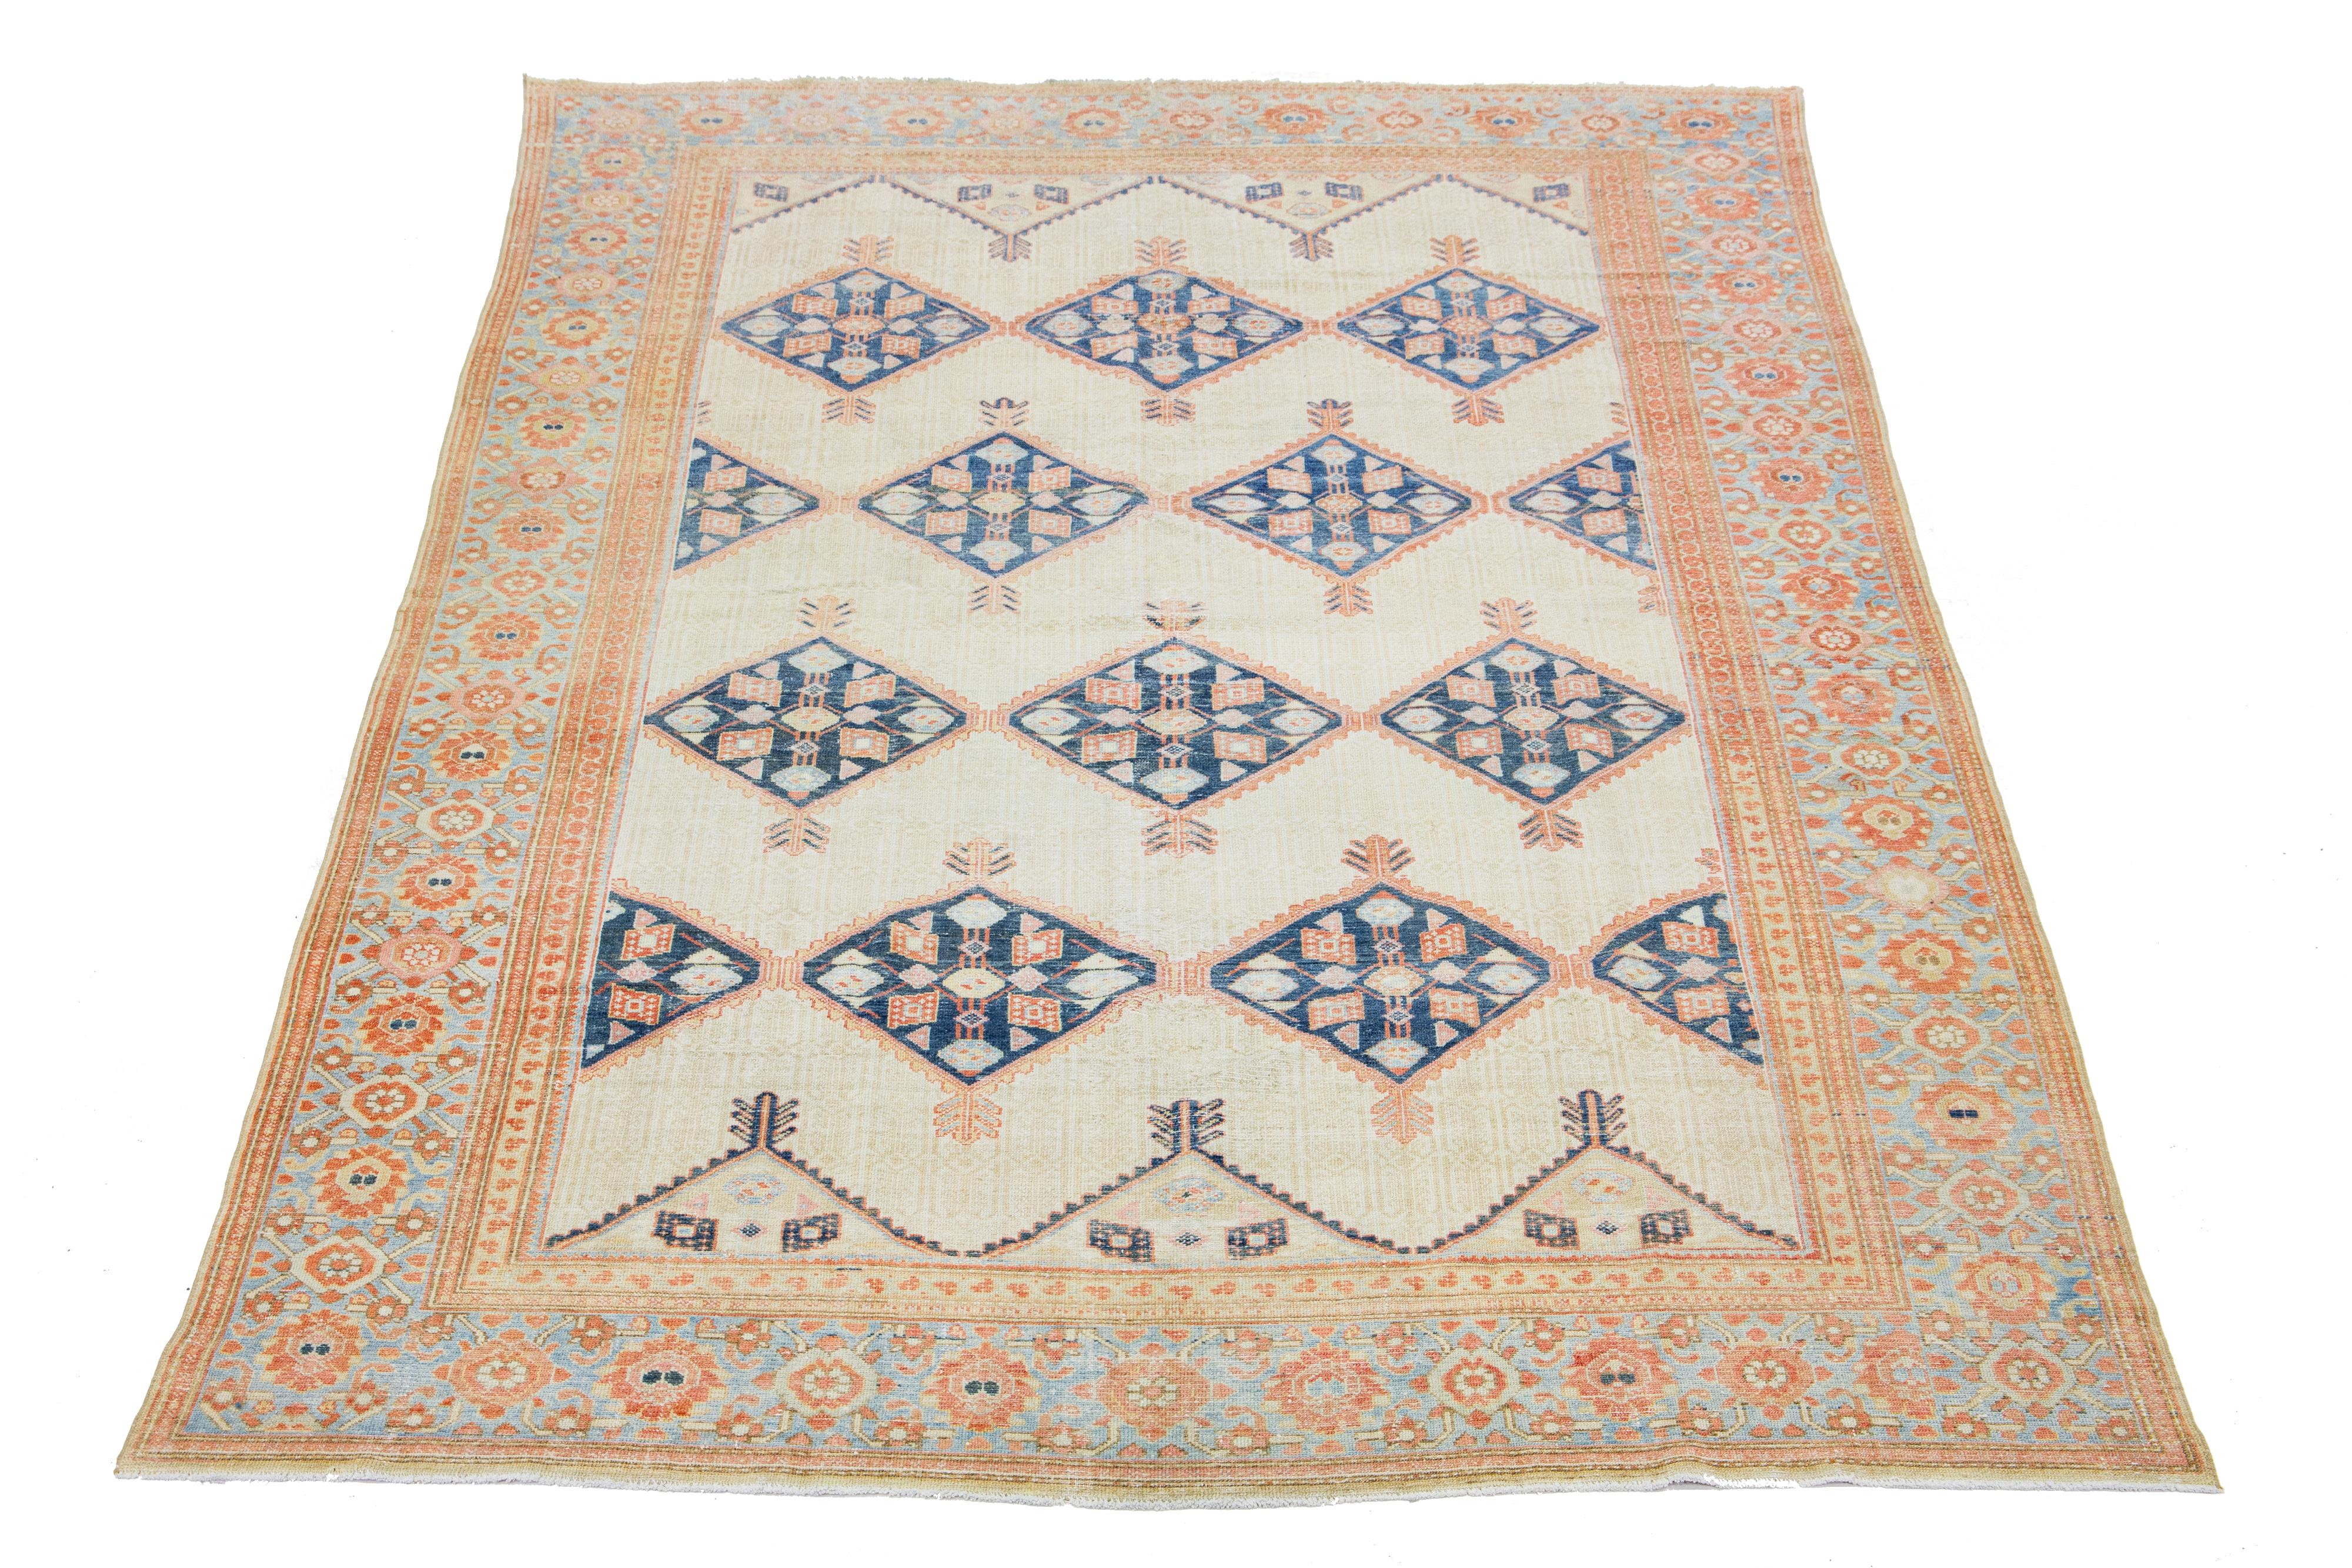 This exquisite antique Hamadan rug is hand-knotted from premium wool, boasting a beige field complemented by a captivating, tribal pattern design enriched with blue and orange accents.

This rug measures 8'3